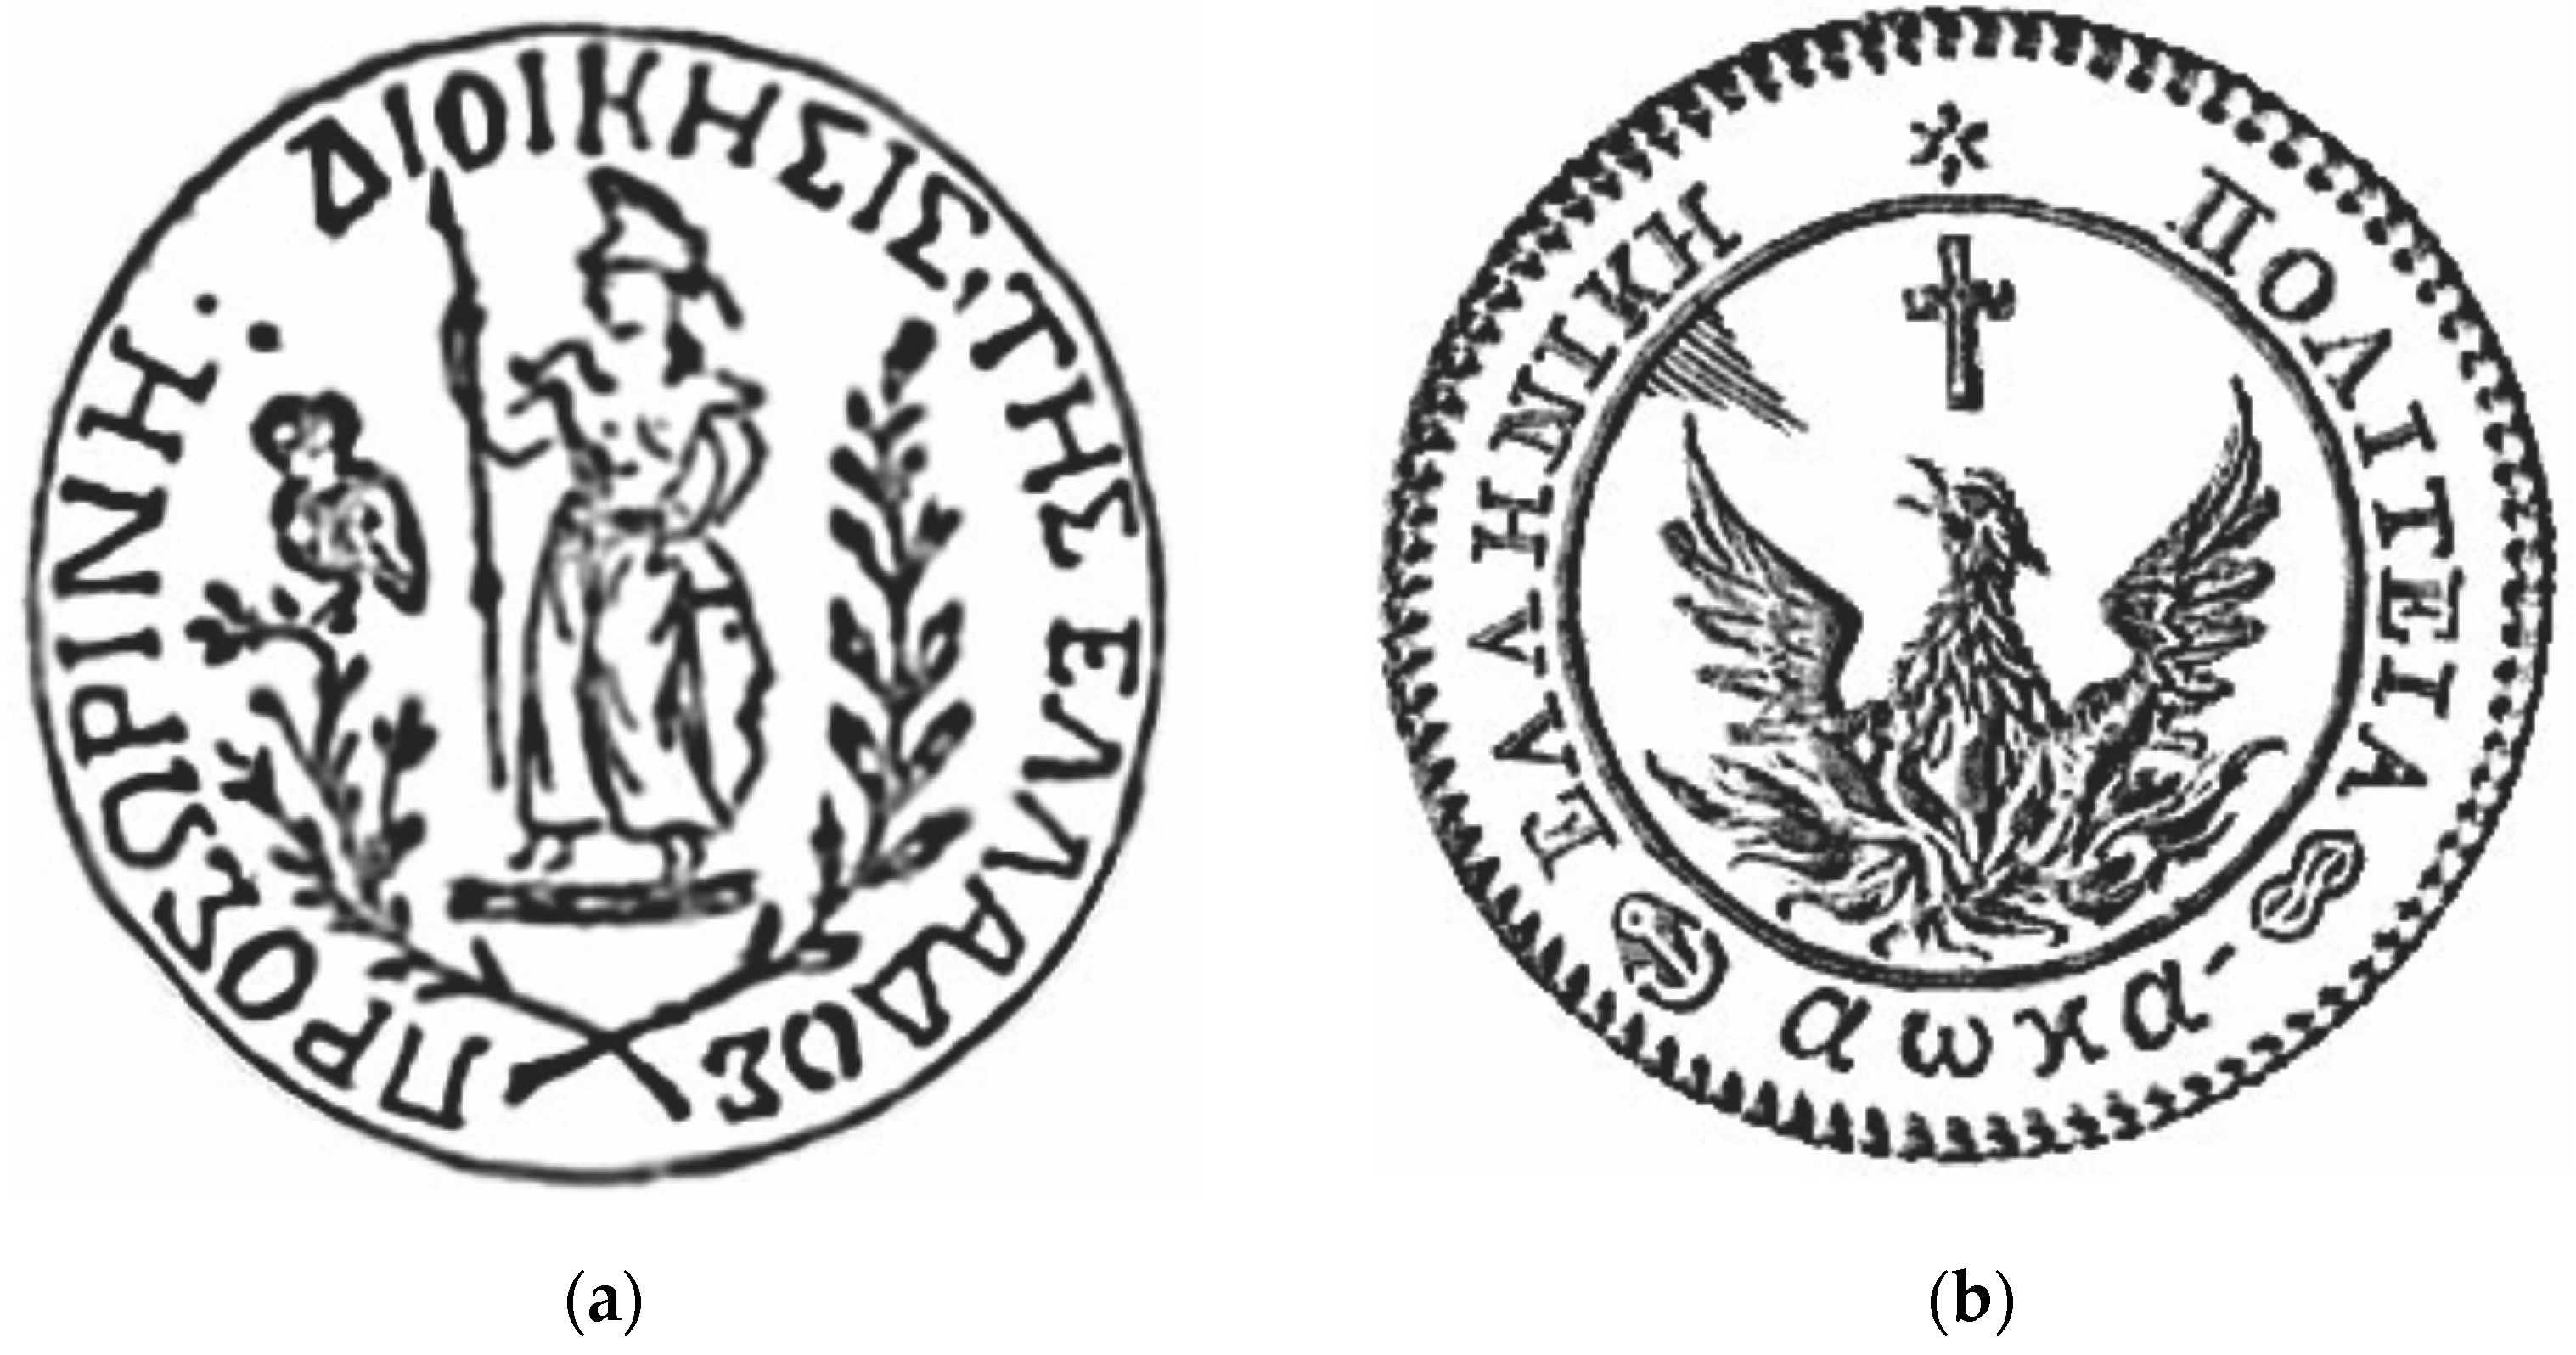 church seals and crests outline